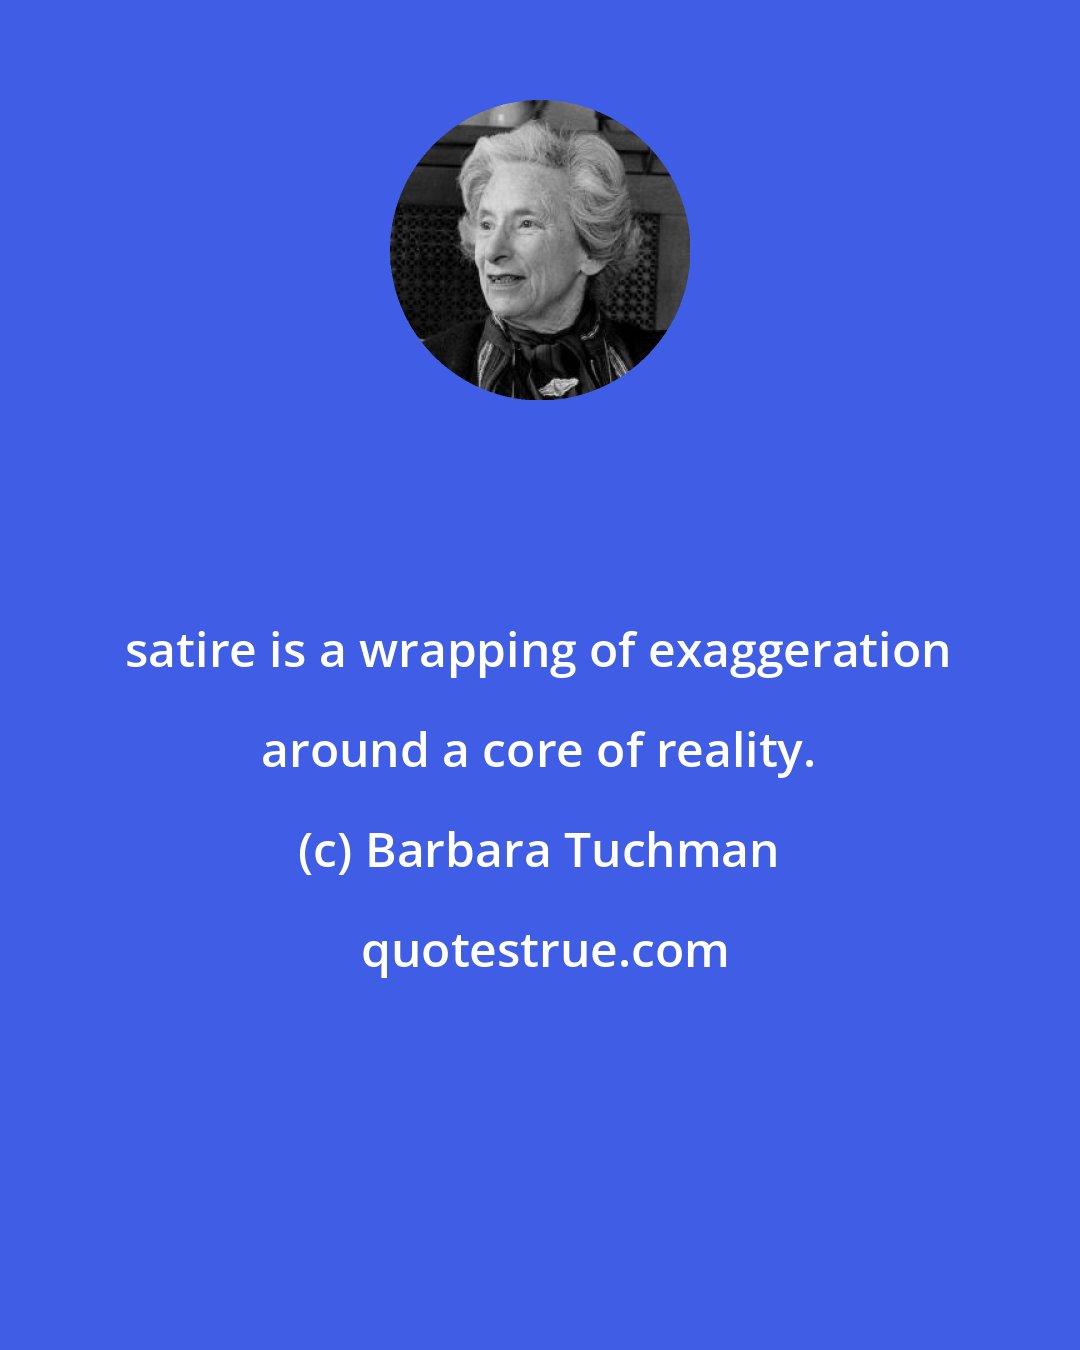 Barbara Tuchman: satire is a wrapping of exaggeration around a core of reality.